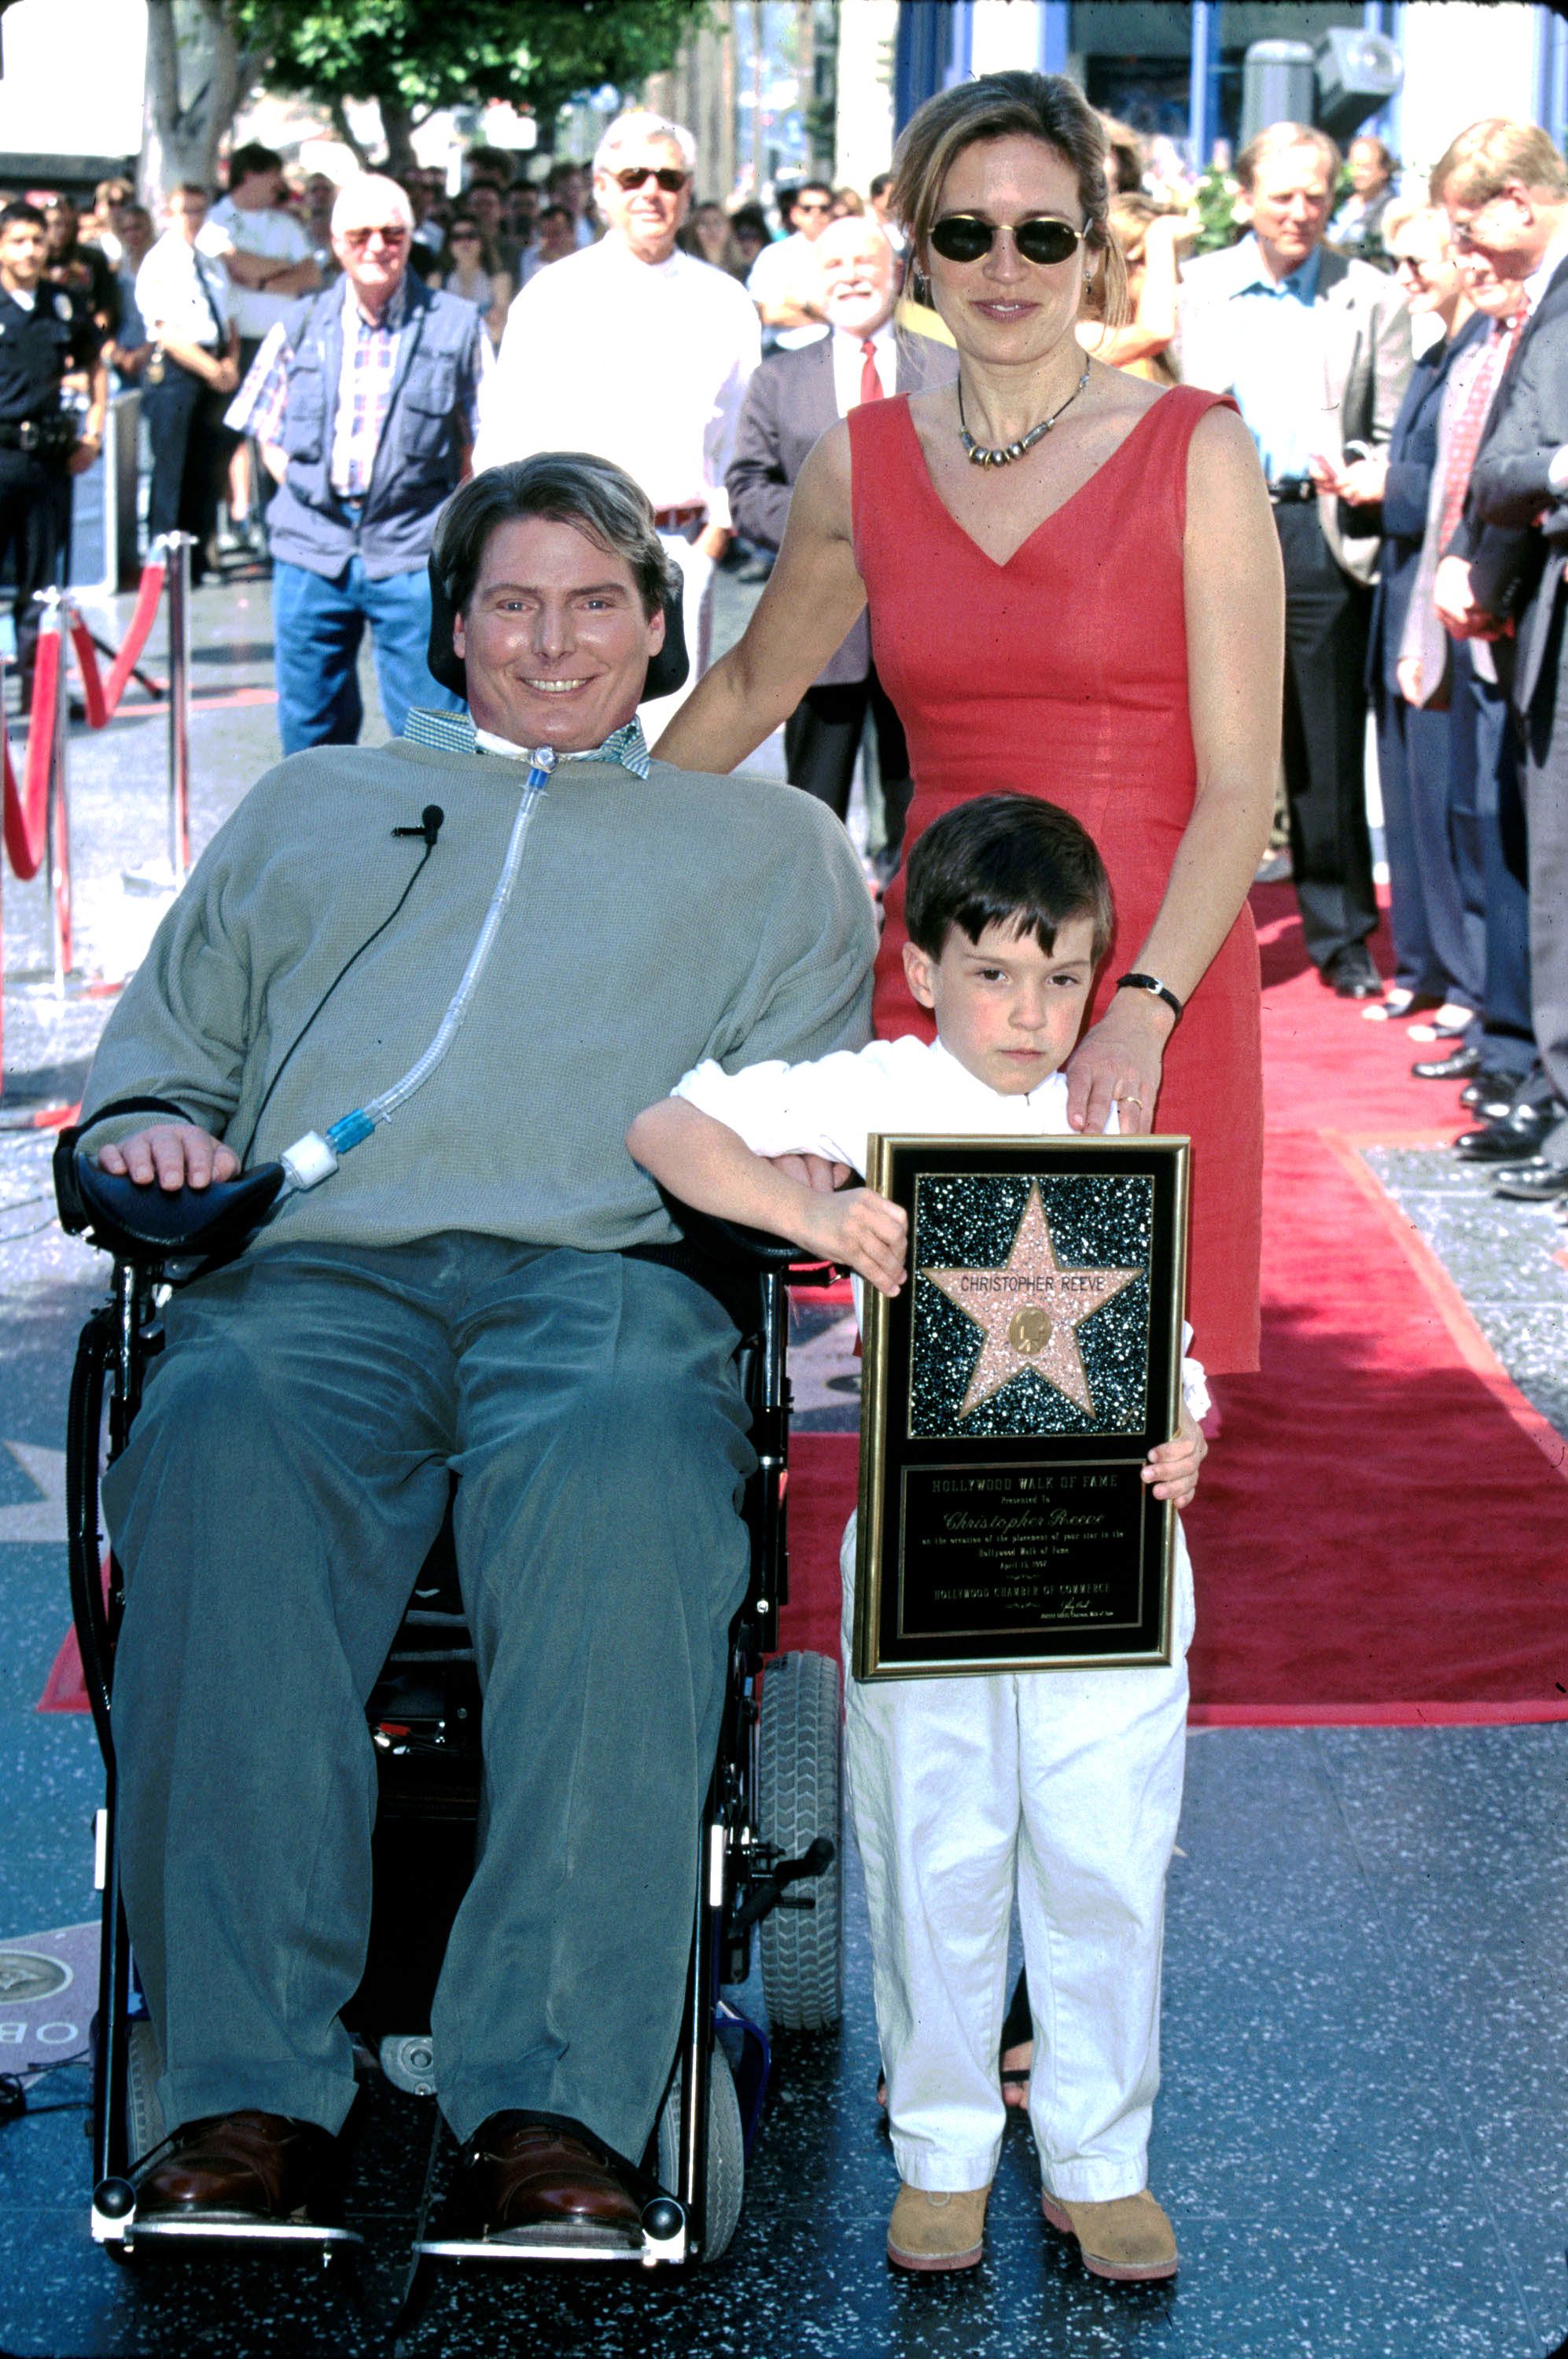 Christopher, Will, and Dana Reeve at Christopher's Hollywood Walk of Fame star ceremony in Hollywood, California in 1997 | Source: Getty Images